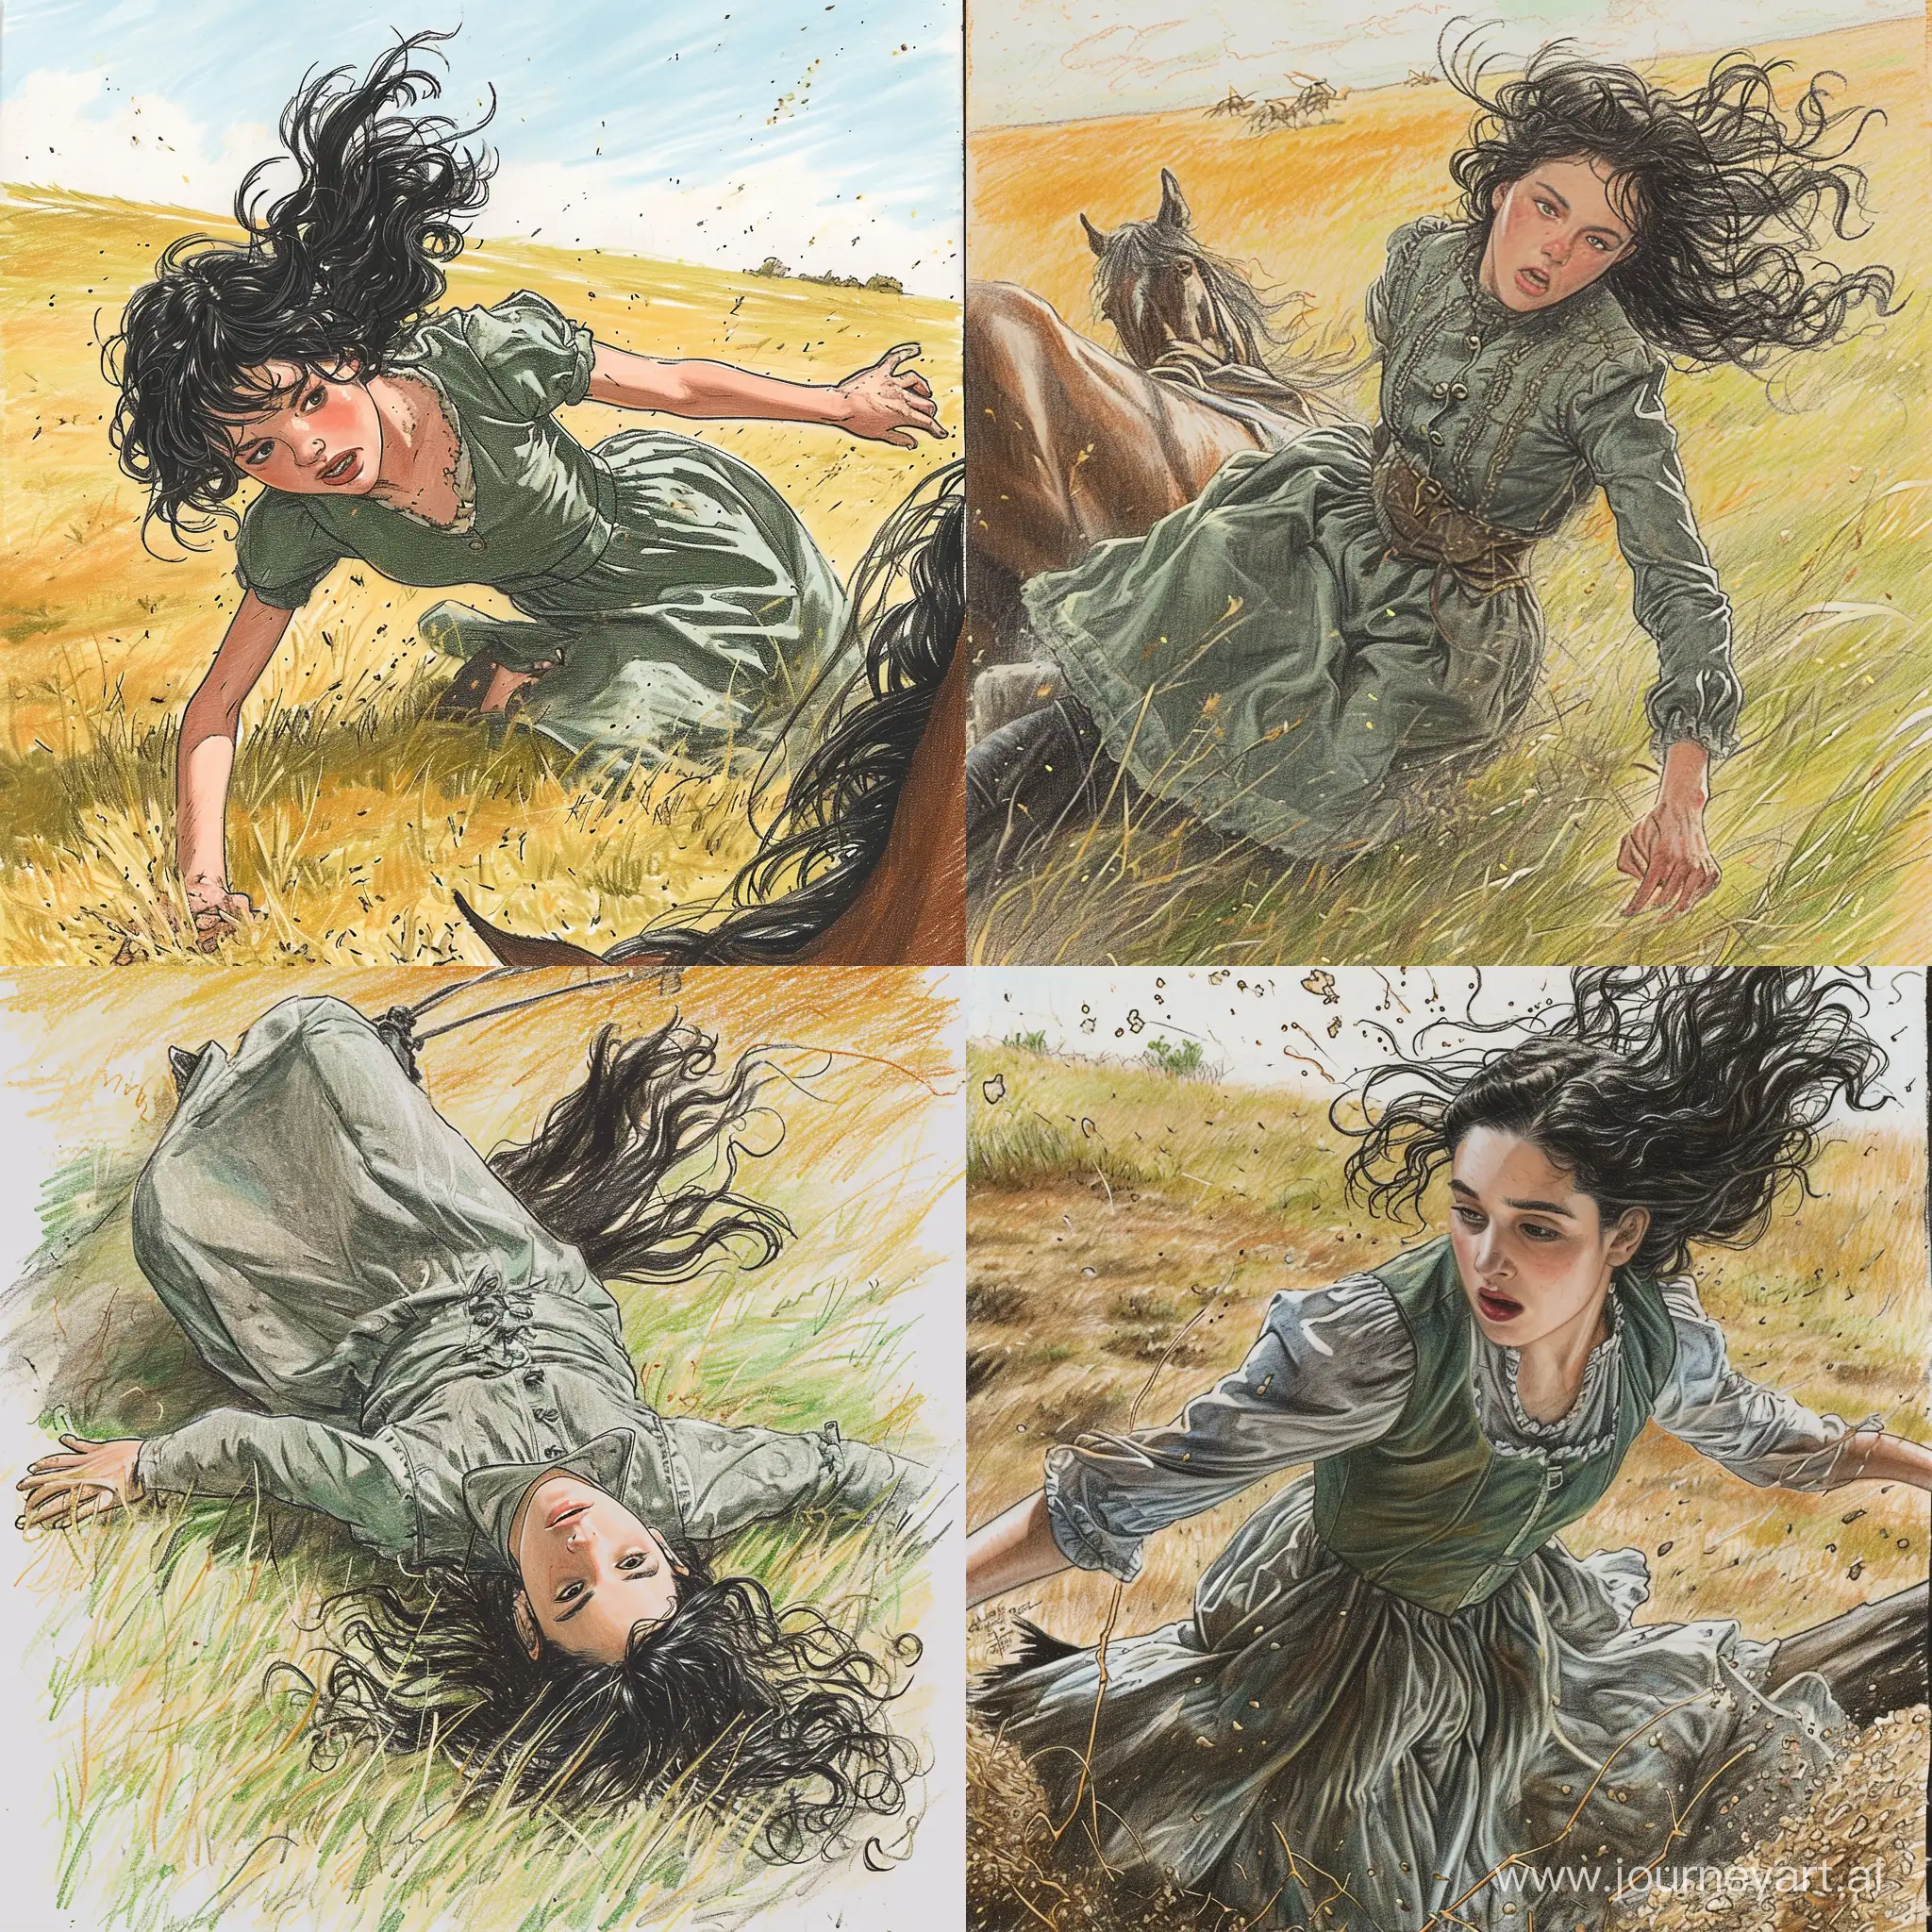 Teenage-Girl-Falling-from-Horse-in-Vibrant-Color-Pencil-Art